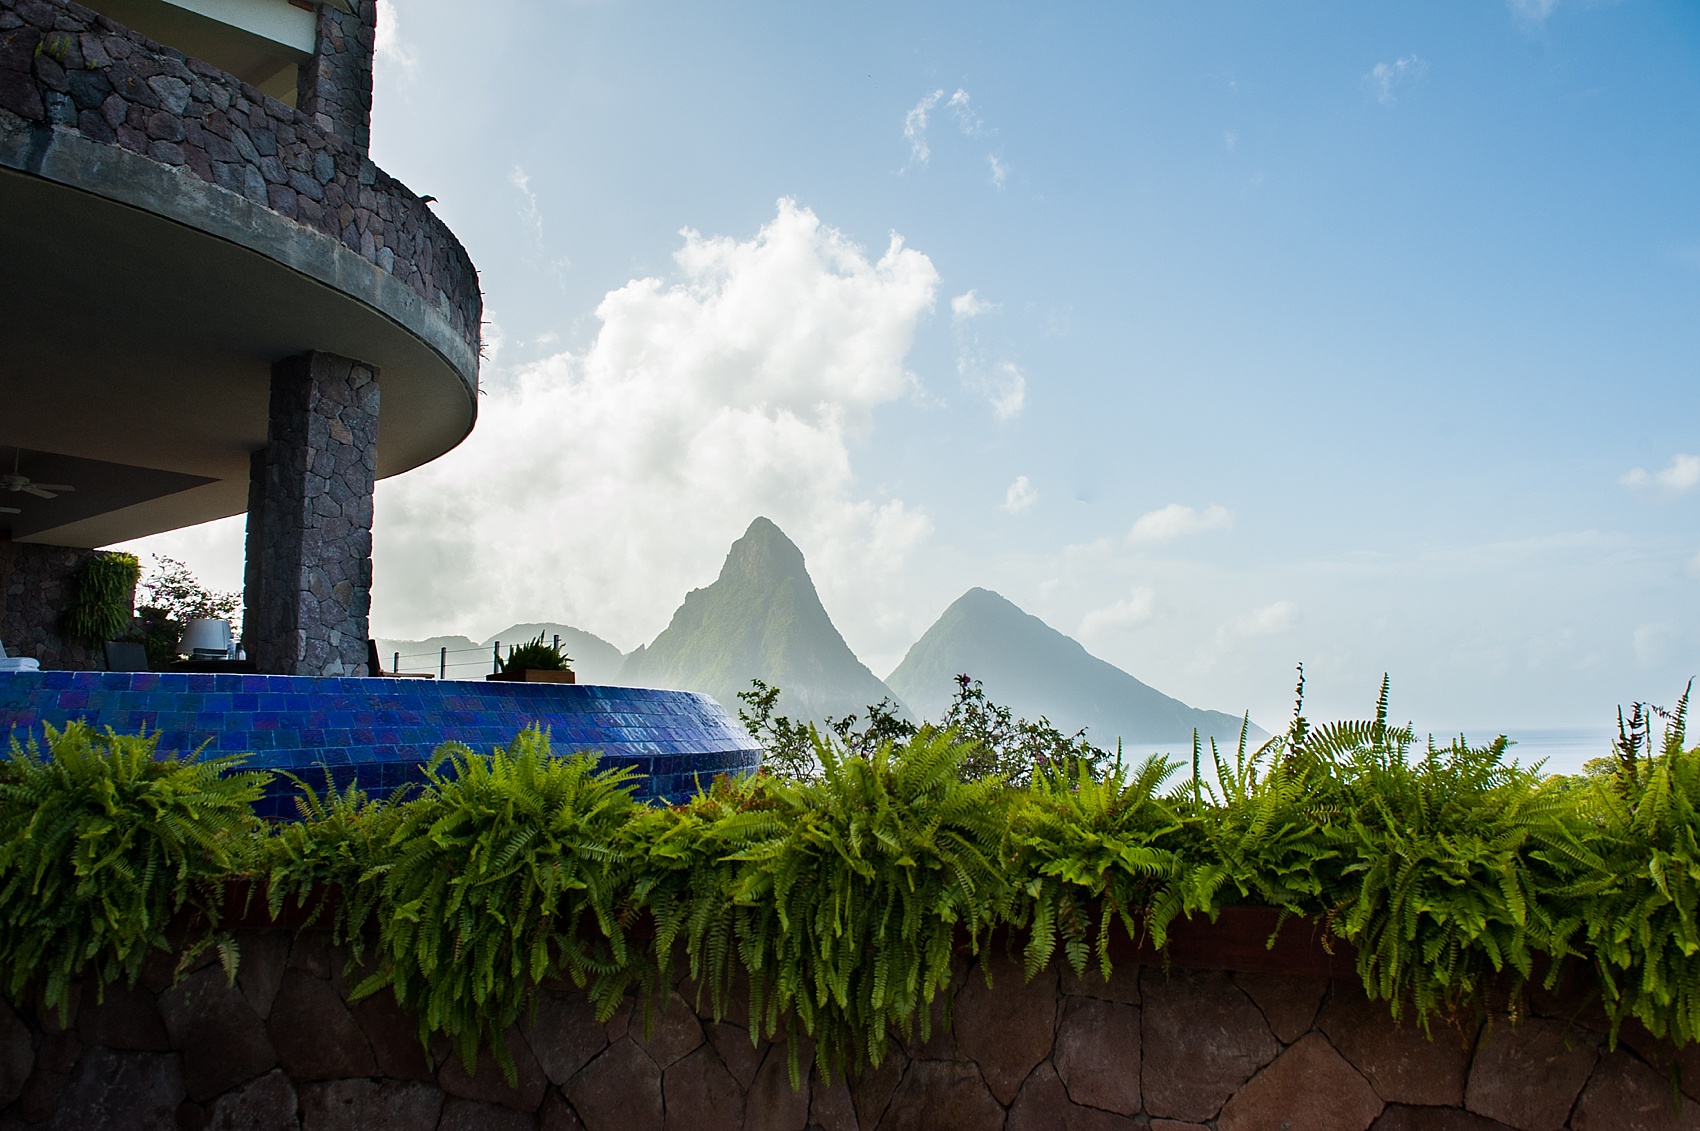 Jade Mountain and Anse Chastanet Resort in St. Lucia, Caribbean. Photos by destination wedding photographer, Mikkel Paige Photography.